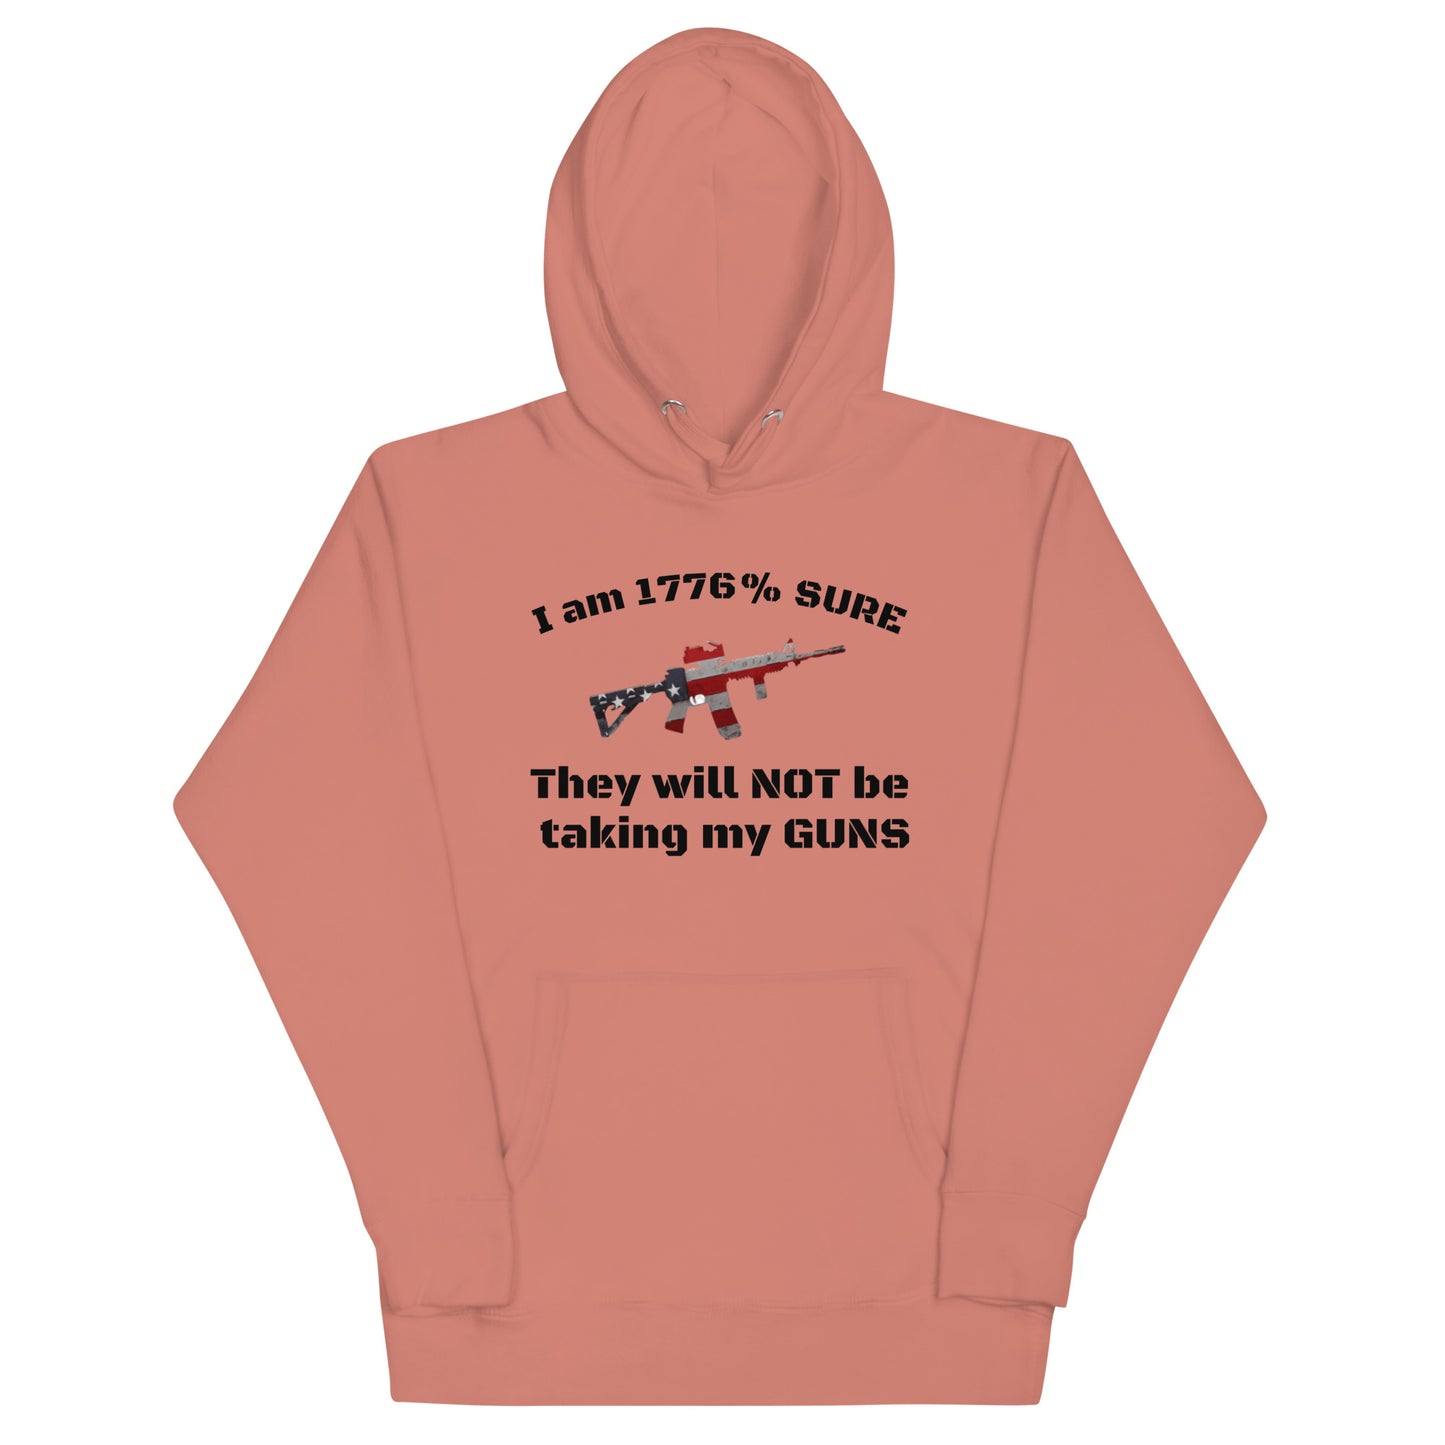 I am 1776% sure they will not be taking my guns Unisex Hoodie (black lettering)